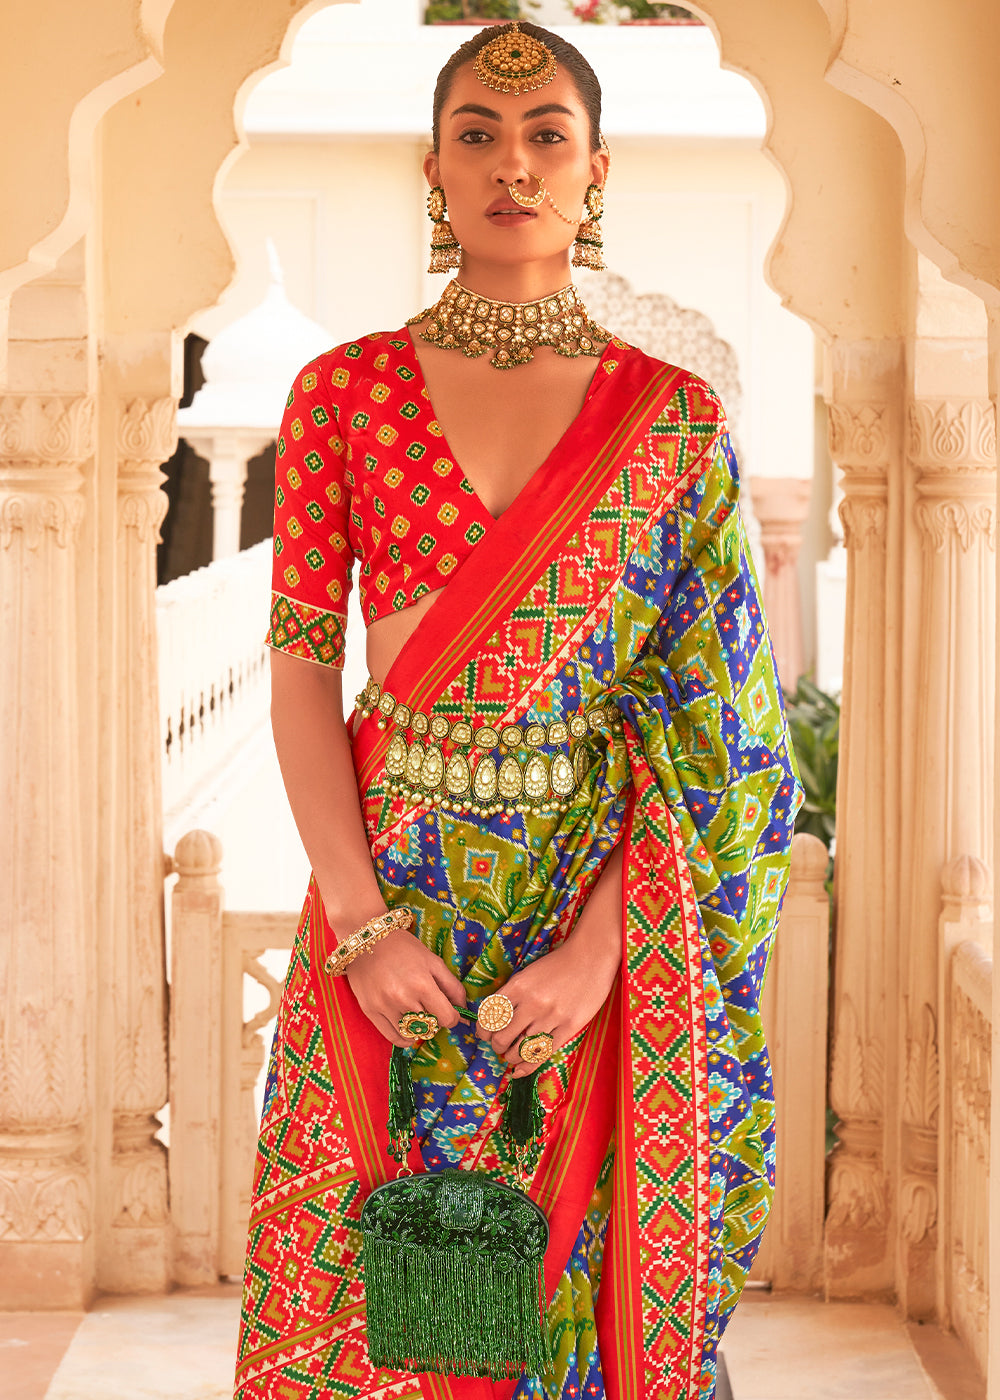 Add a Pop of Color with the Blue and Green Printed Patola Tussar Silk Saree